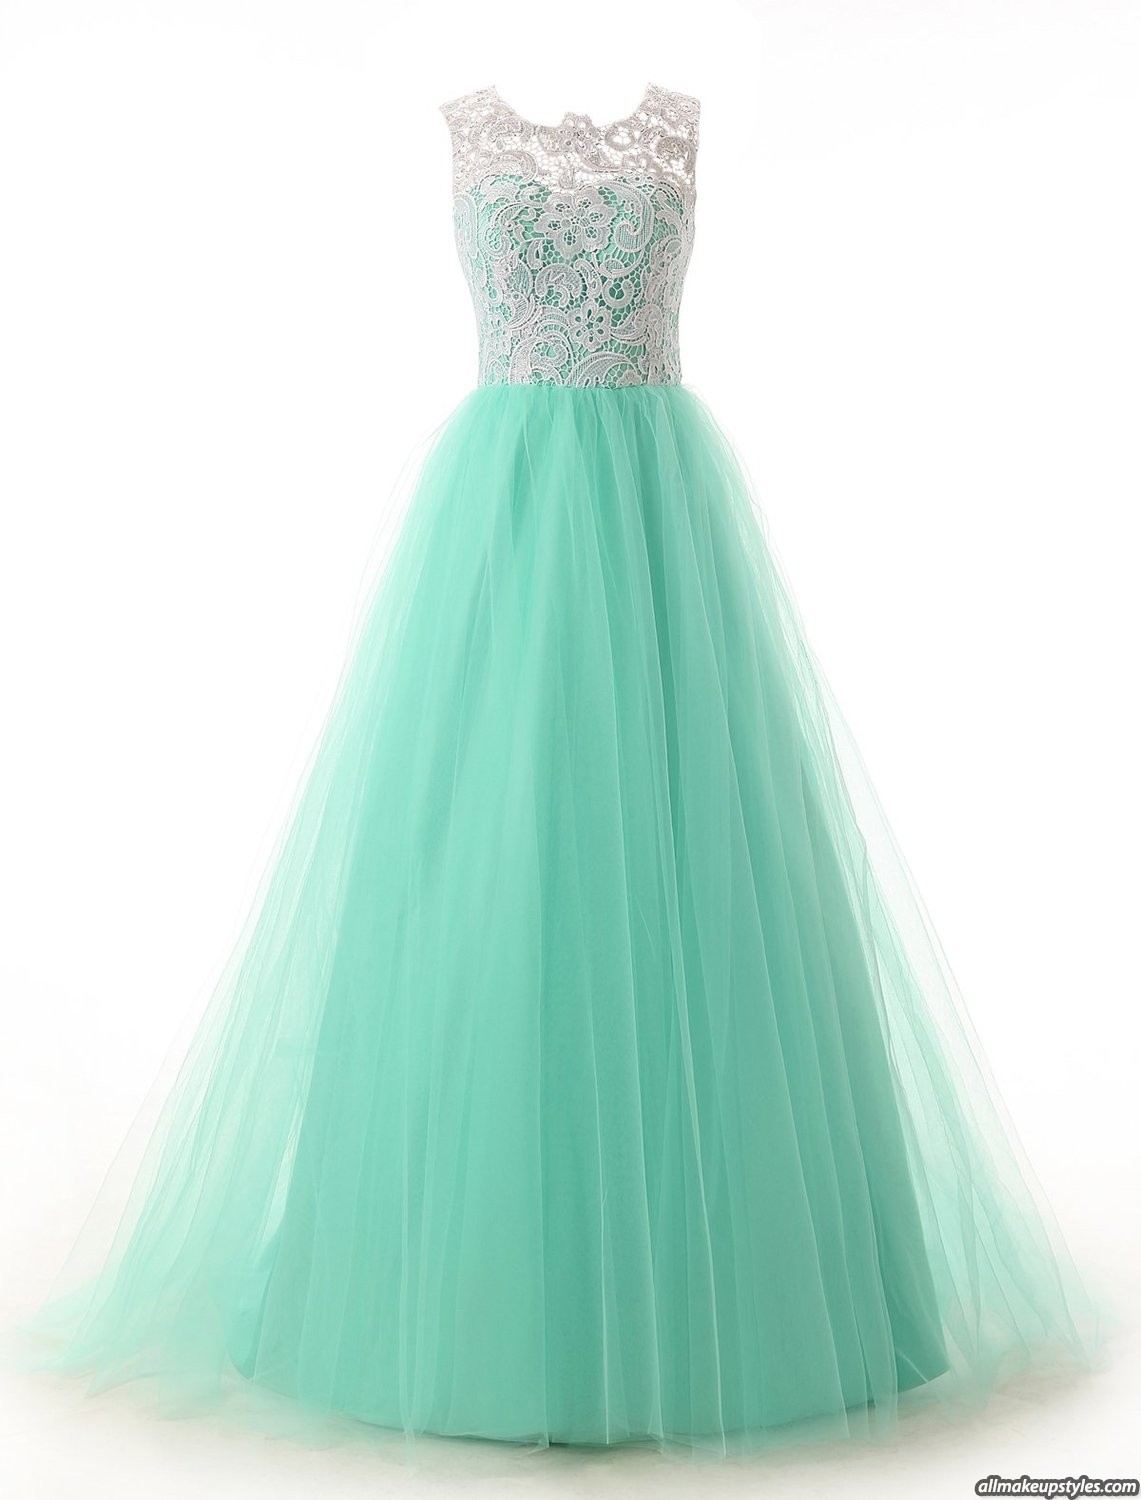 Long Cap Sleeves Lace Prom Dresses,simple Prom Dresses, Prom Dress,mint Prom Gowns